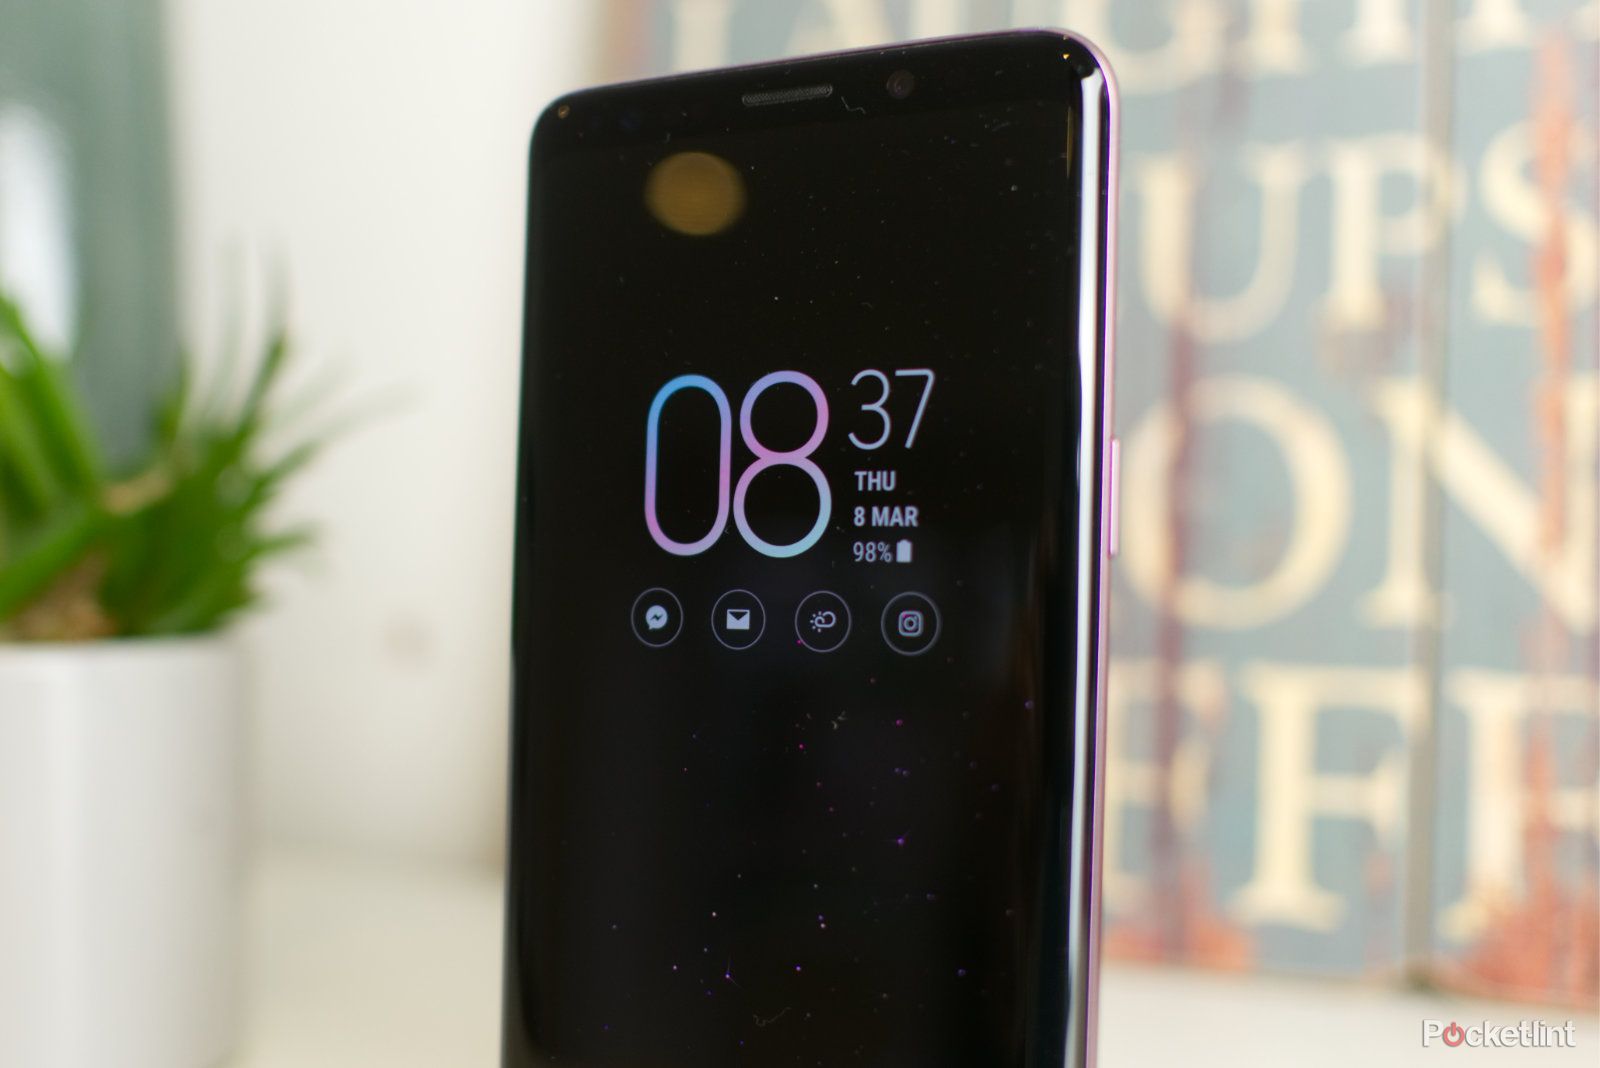 Samsung Galaxy S10 could have ridiculously sharp screen image 1